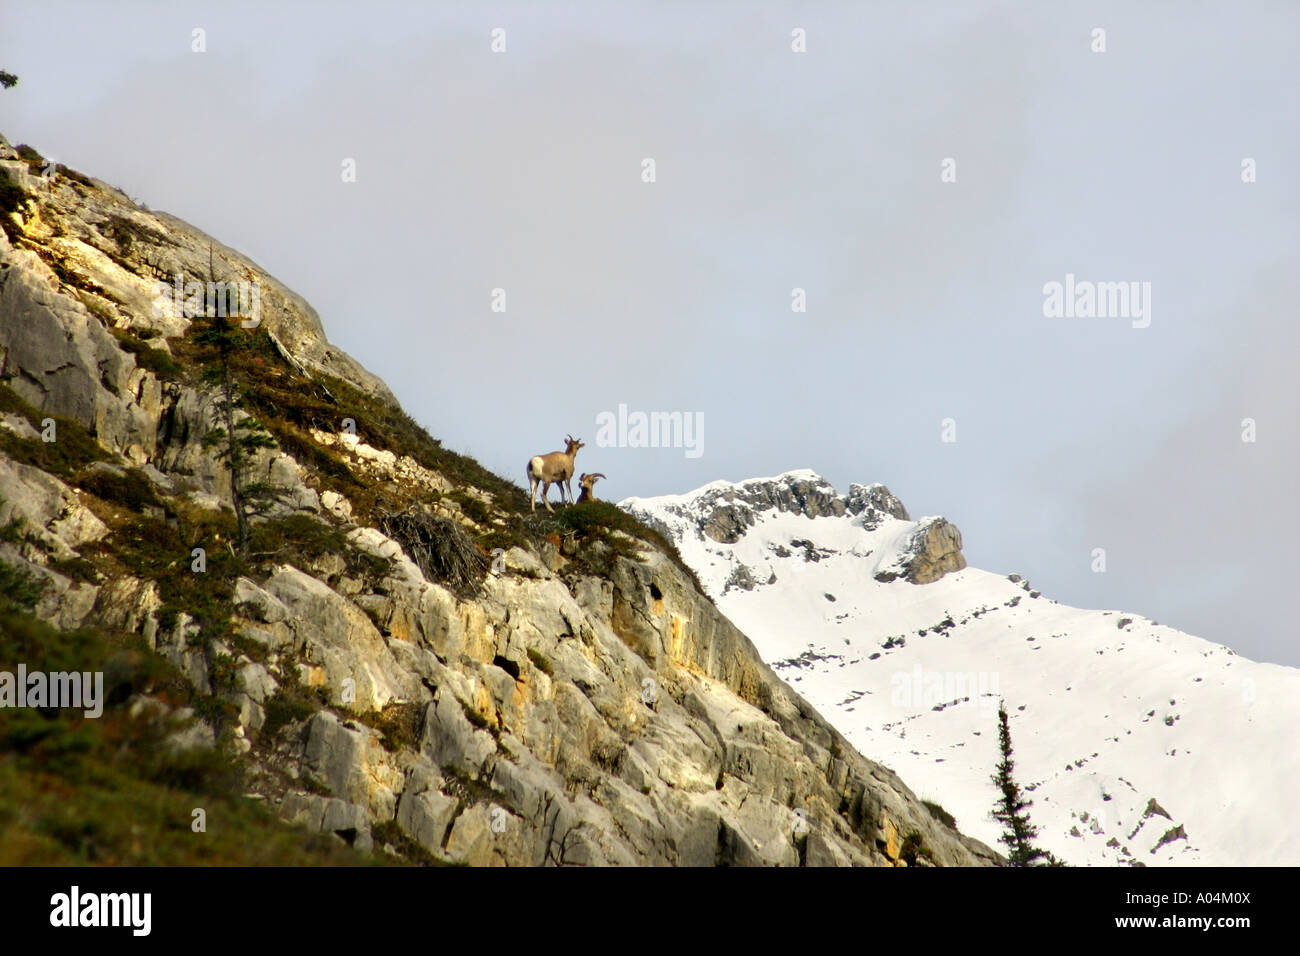 38,982.07696 Rocky Mountain Bighorn Sheep -- At Home in the High Country standing watch over the mountains and valley below. Stock Photo